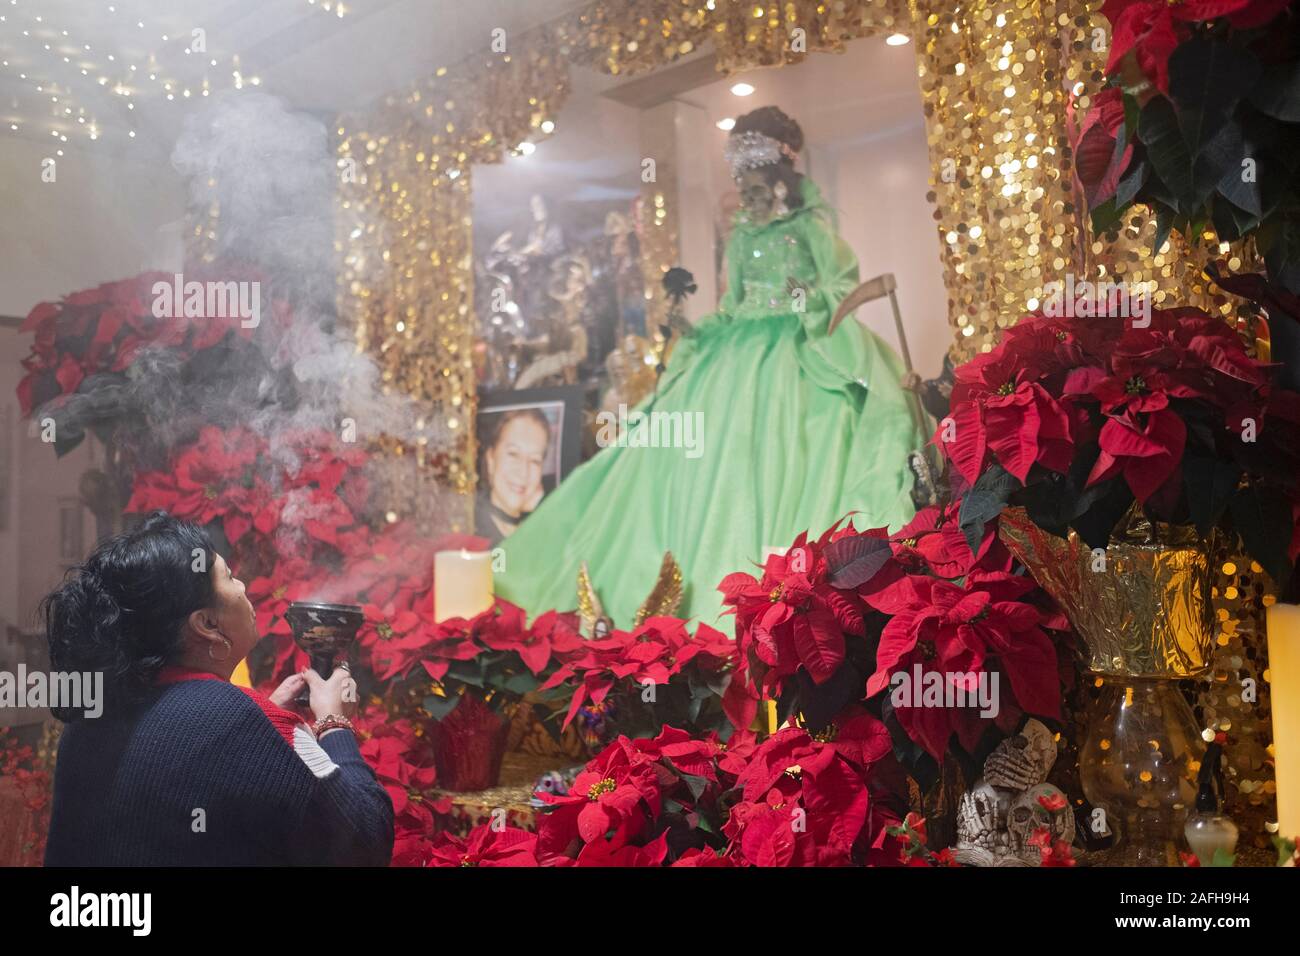 A Santa Muerte devotee prays at a home temple in Jackson Heights, Queens, New York City. She blows smoke at a deity as is a custom. Stock Photo